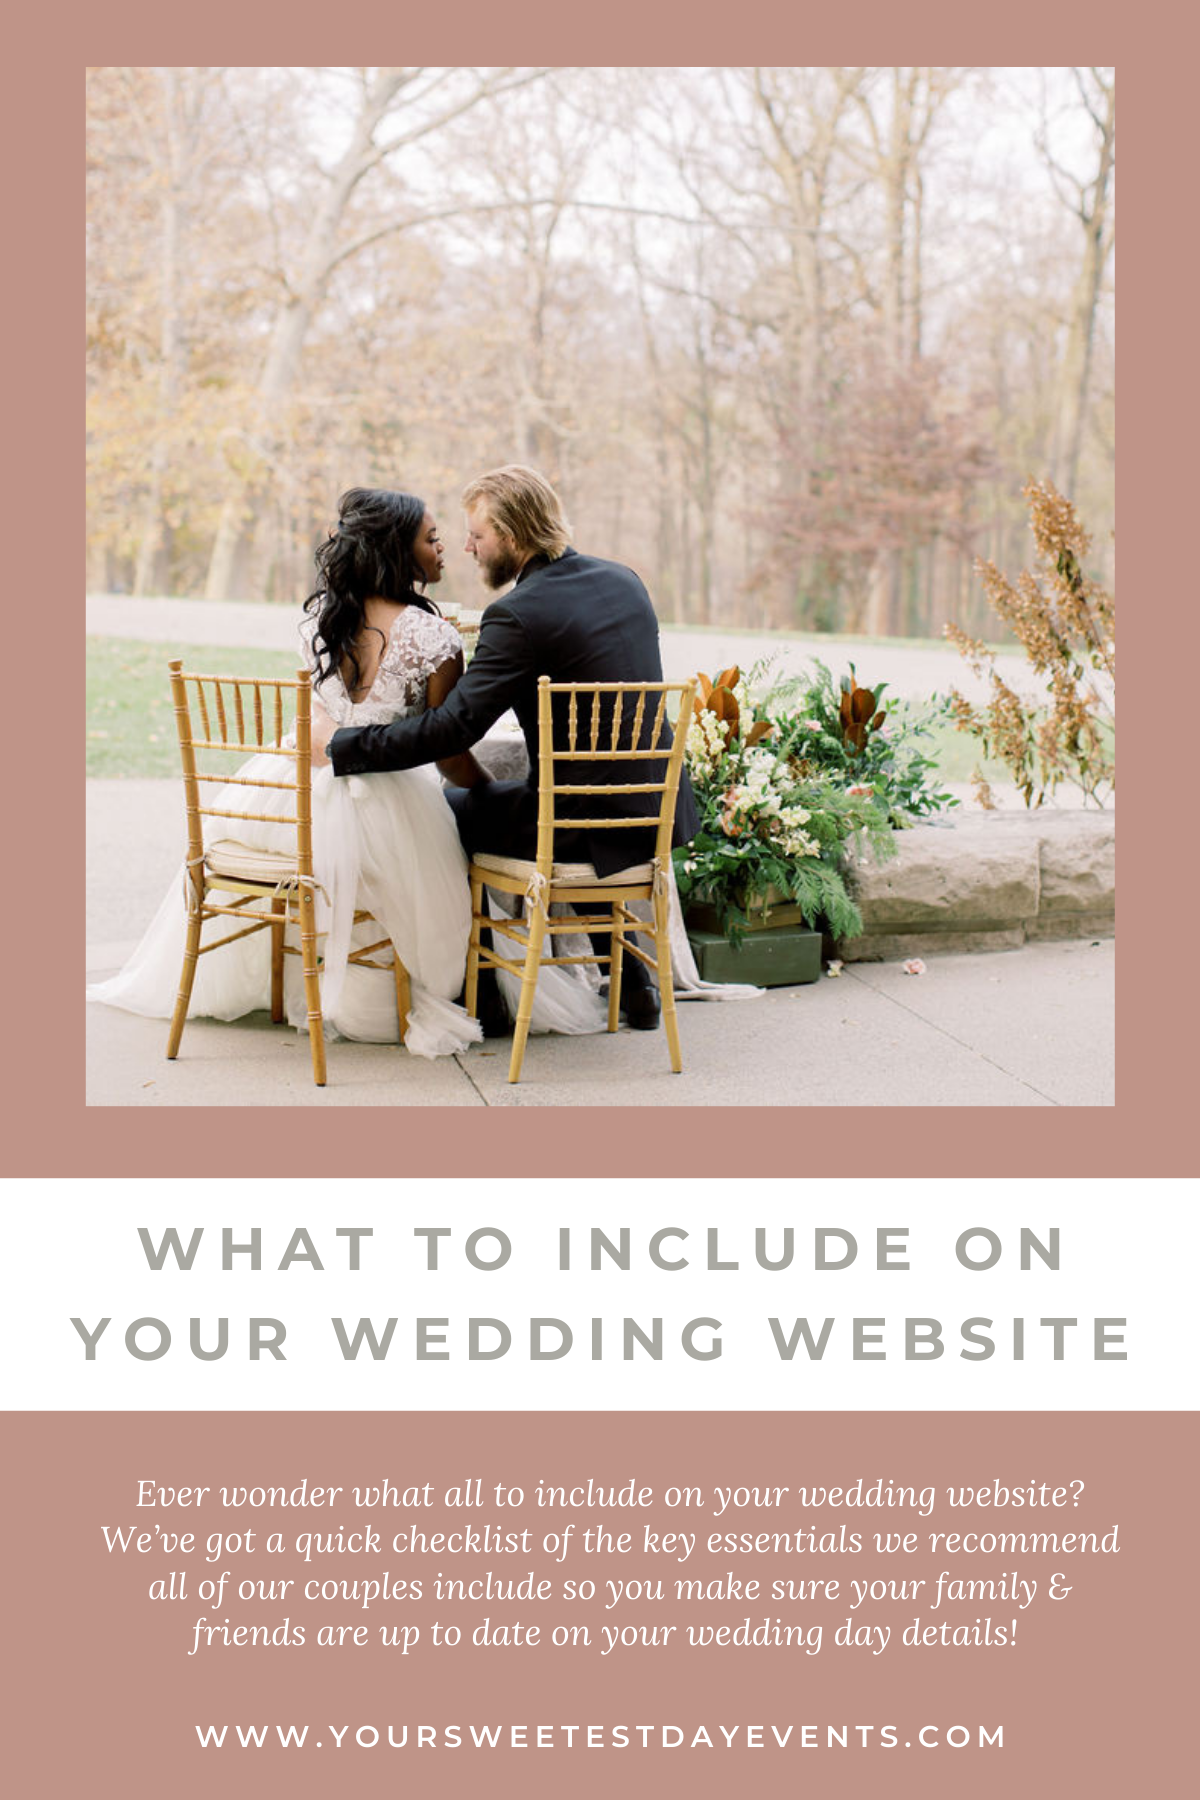 What to Include on Your Wedding Website // Your Sweetest Day Events (relevant hashtags: #weddingplanning #weddingwebsite #savethedates)